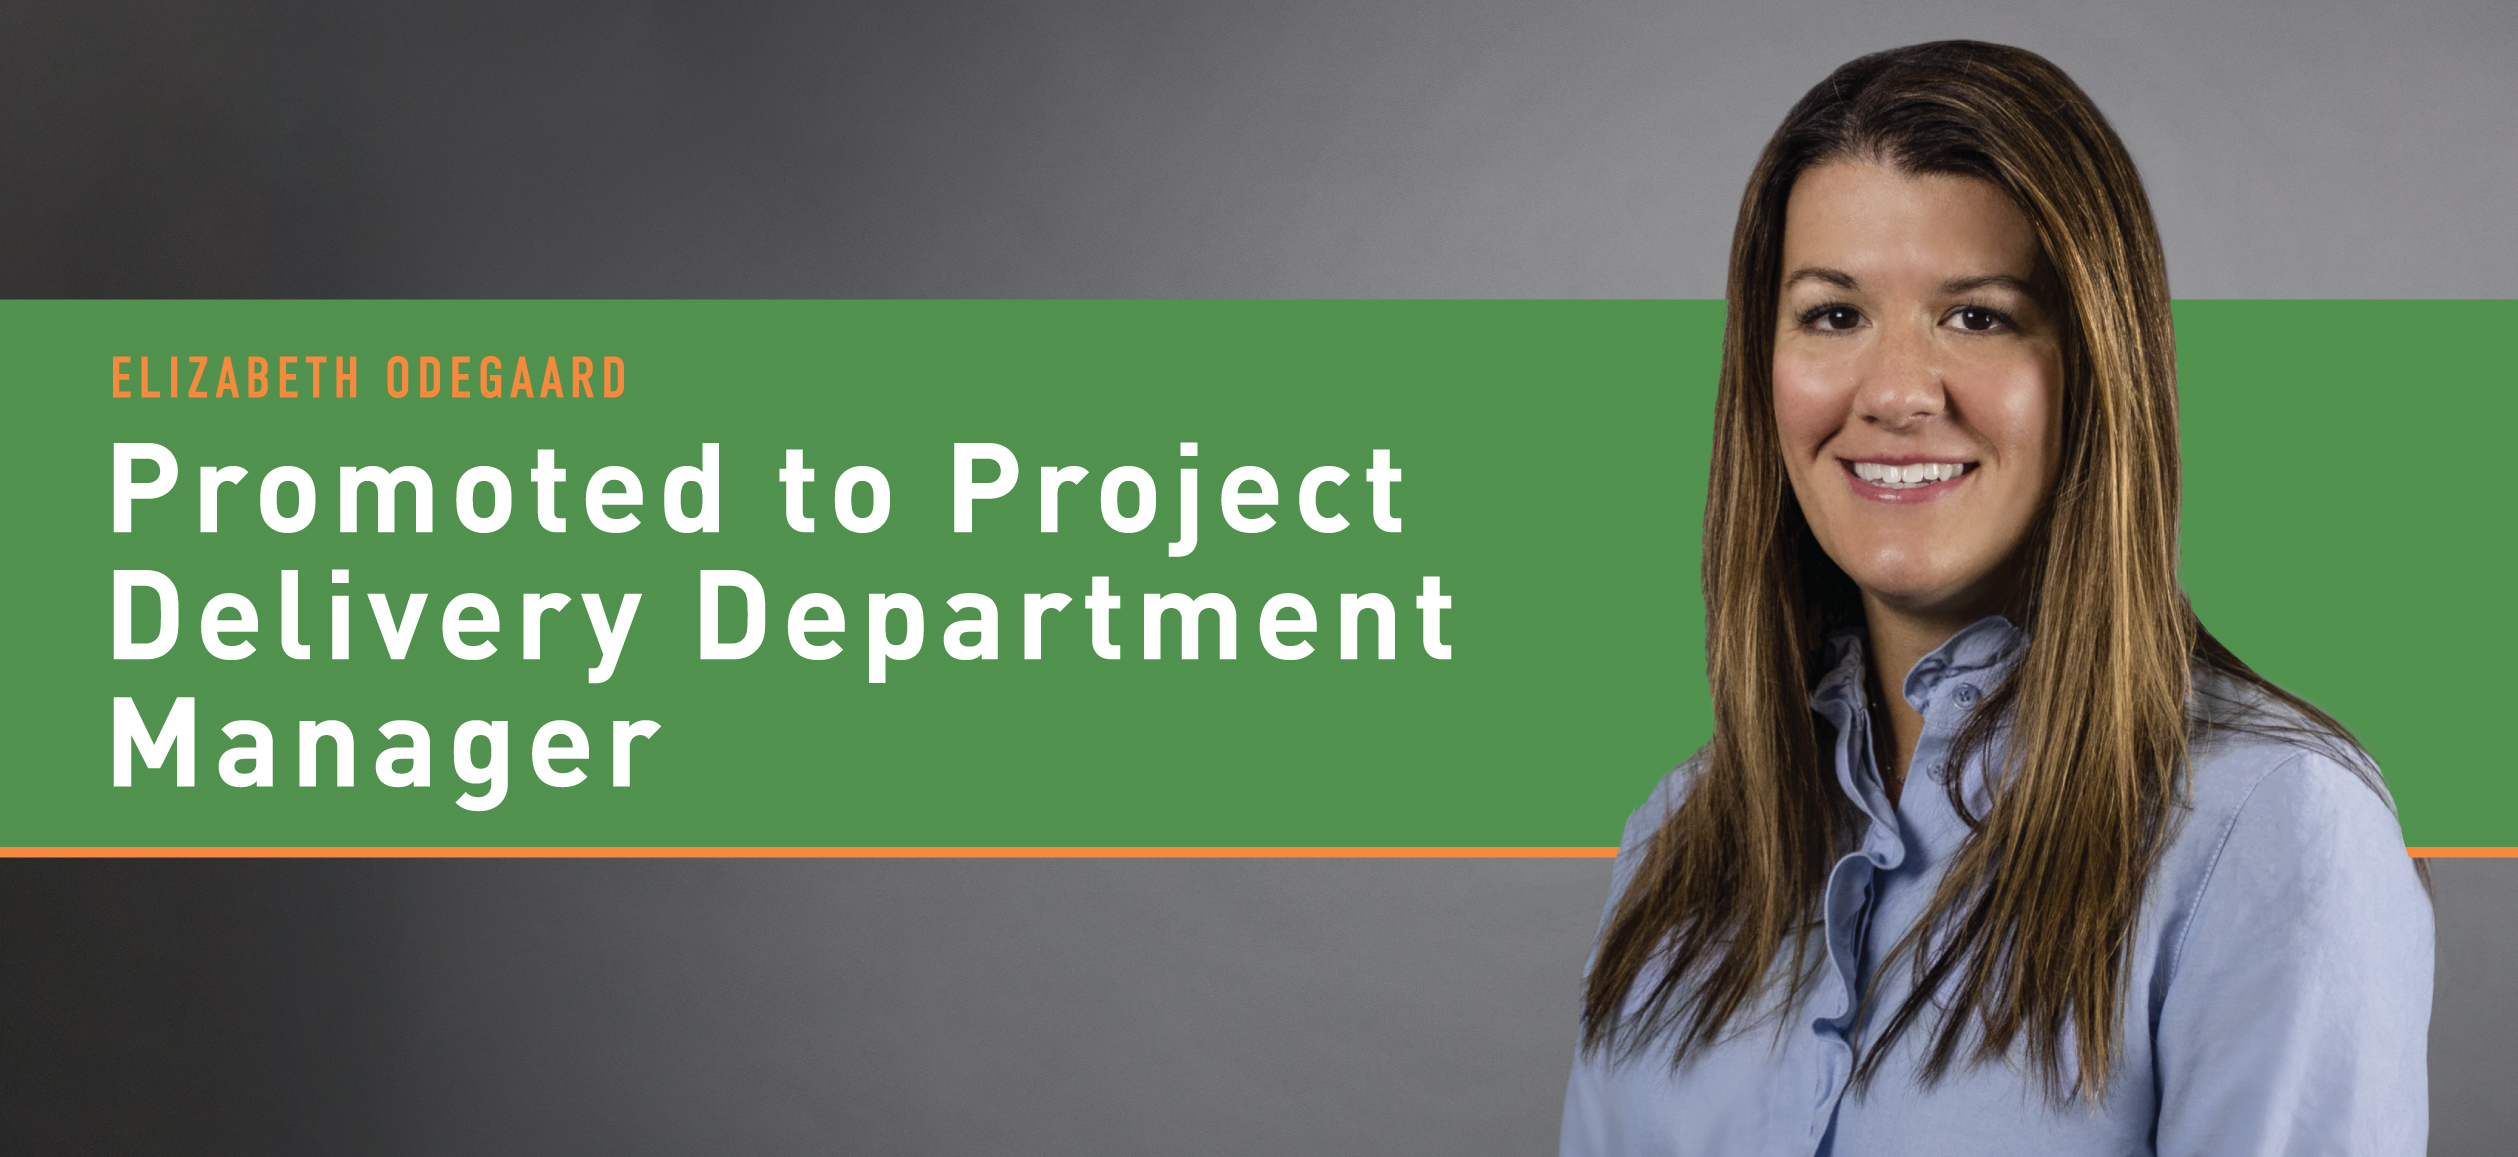 Elizabeth Odegaard Promoted to Project Delivery Department Manager